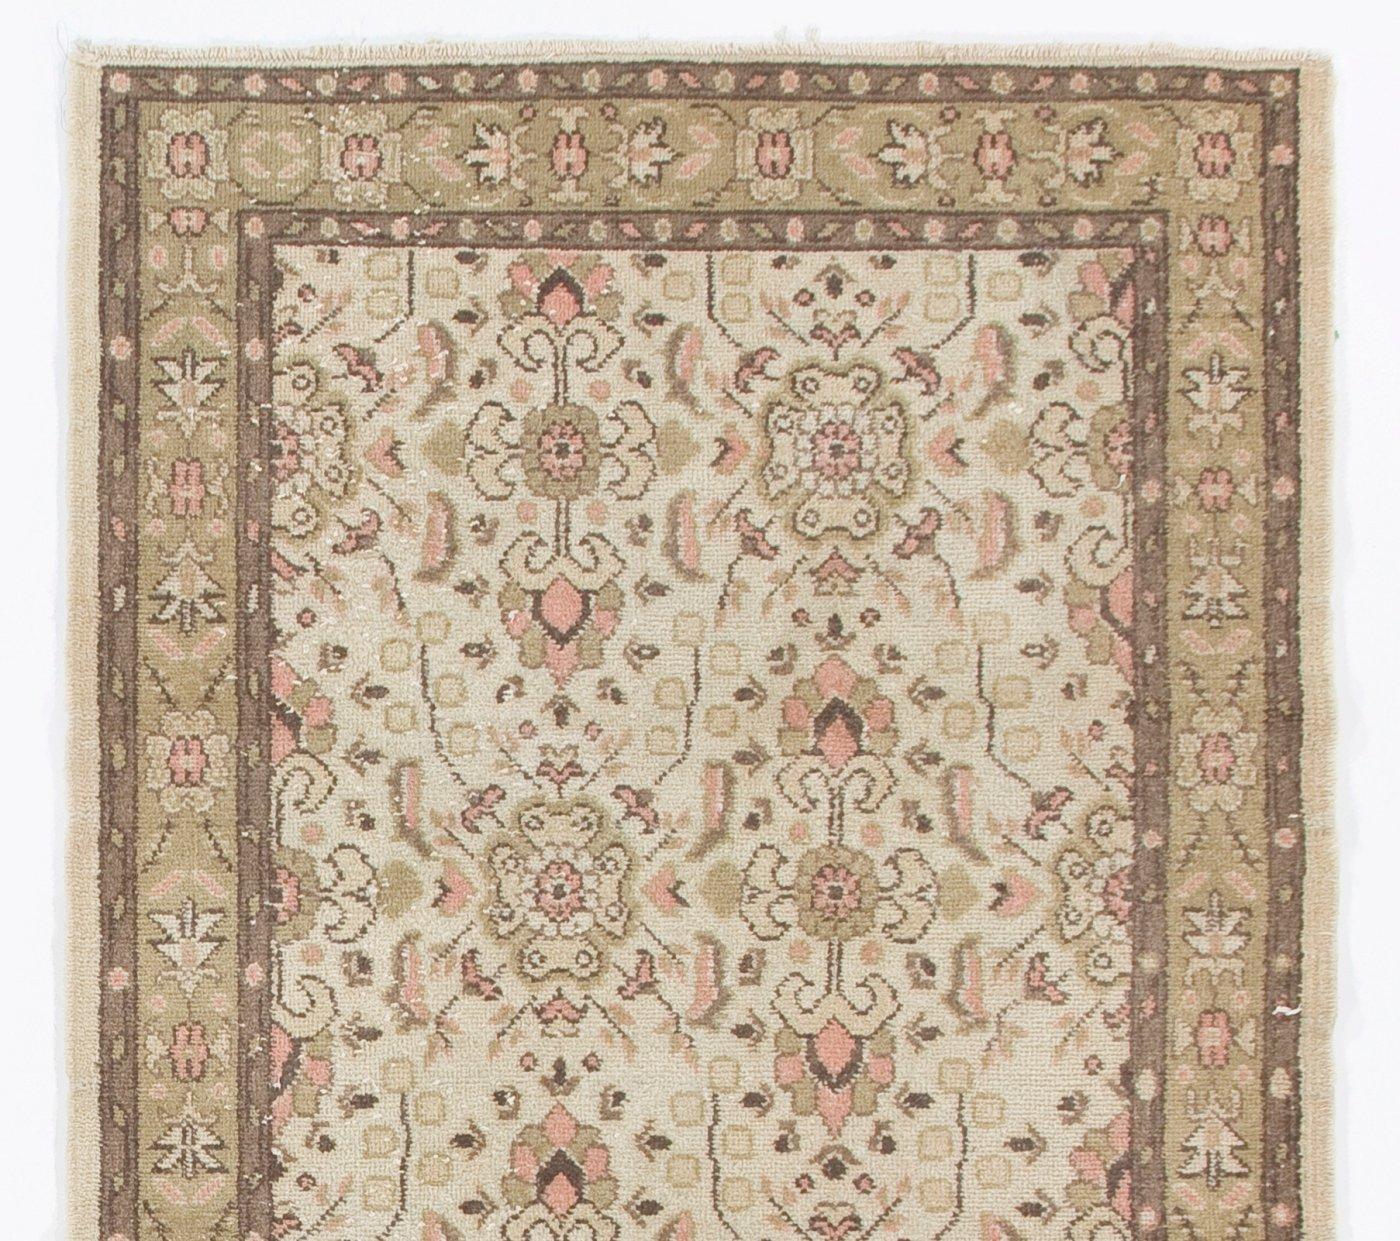 A vintage hand-knotted Turkish rug with an all-over floral design in coral pink and light moss green against a beige background. The rug is finely hand-knotted with even medium wool pile on cotton foundation. It is in very good condition, sturdy and